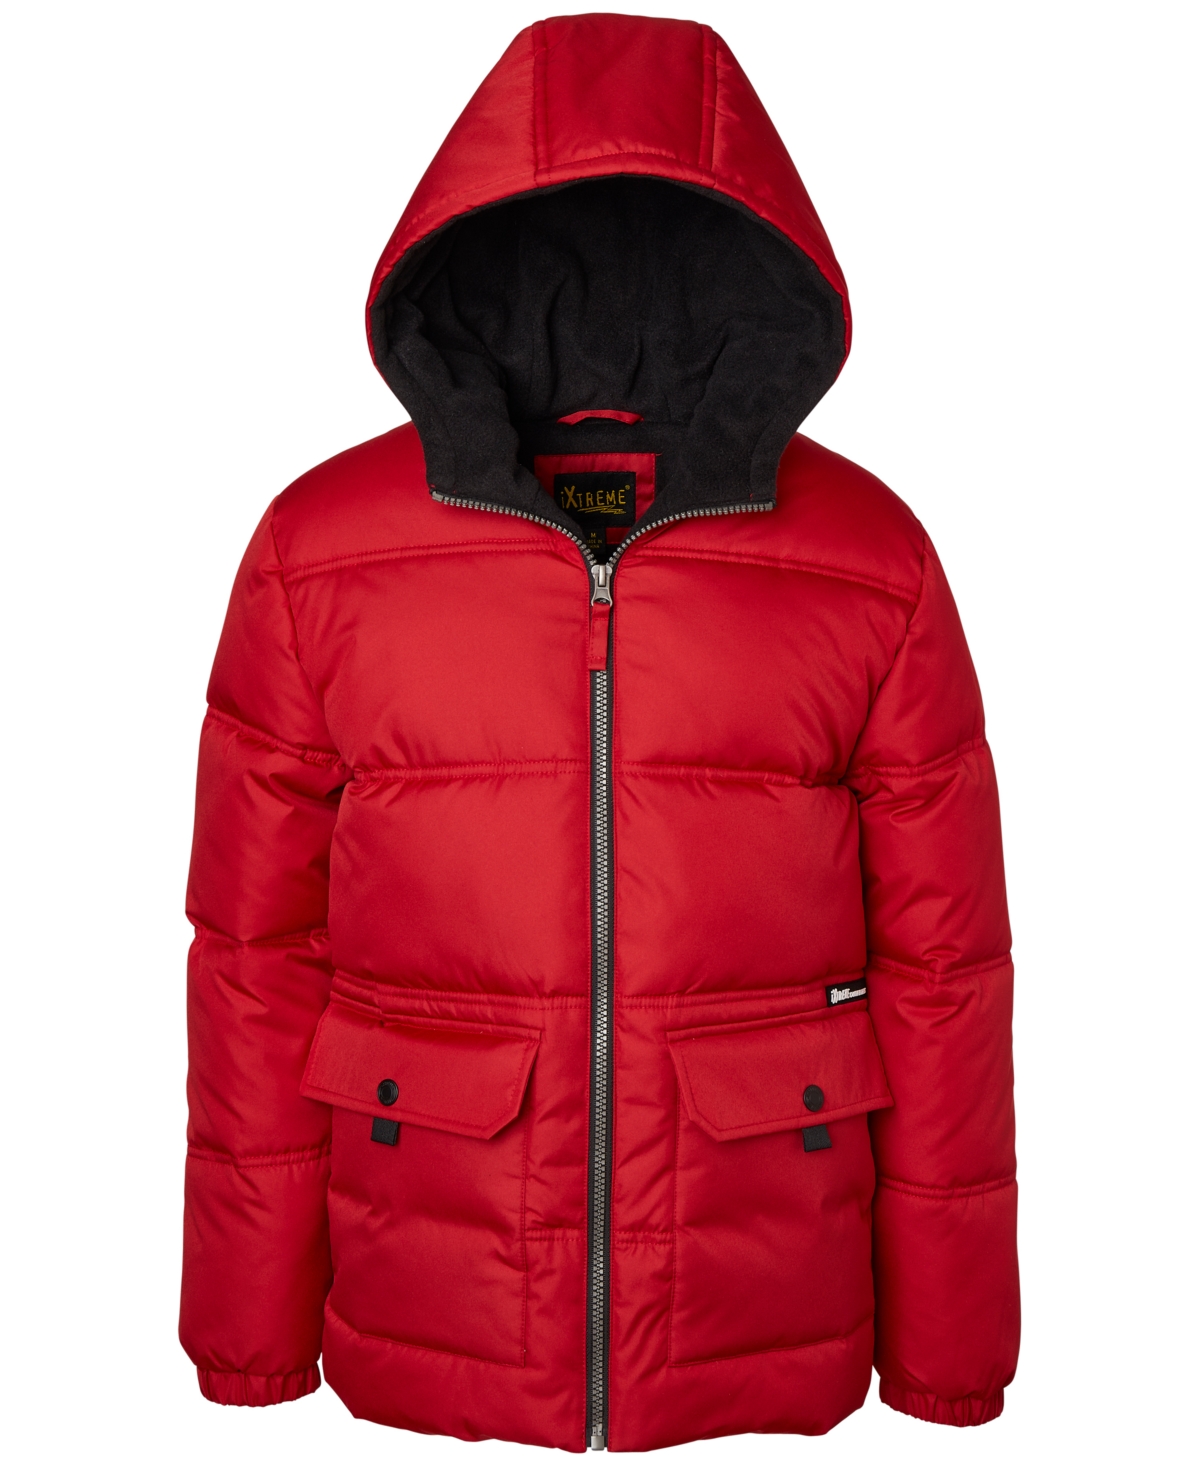 Wippette Toddler & Little Boys Ixtreme Big Pocket Puffer In Red